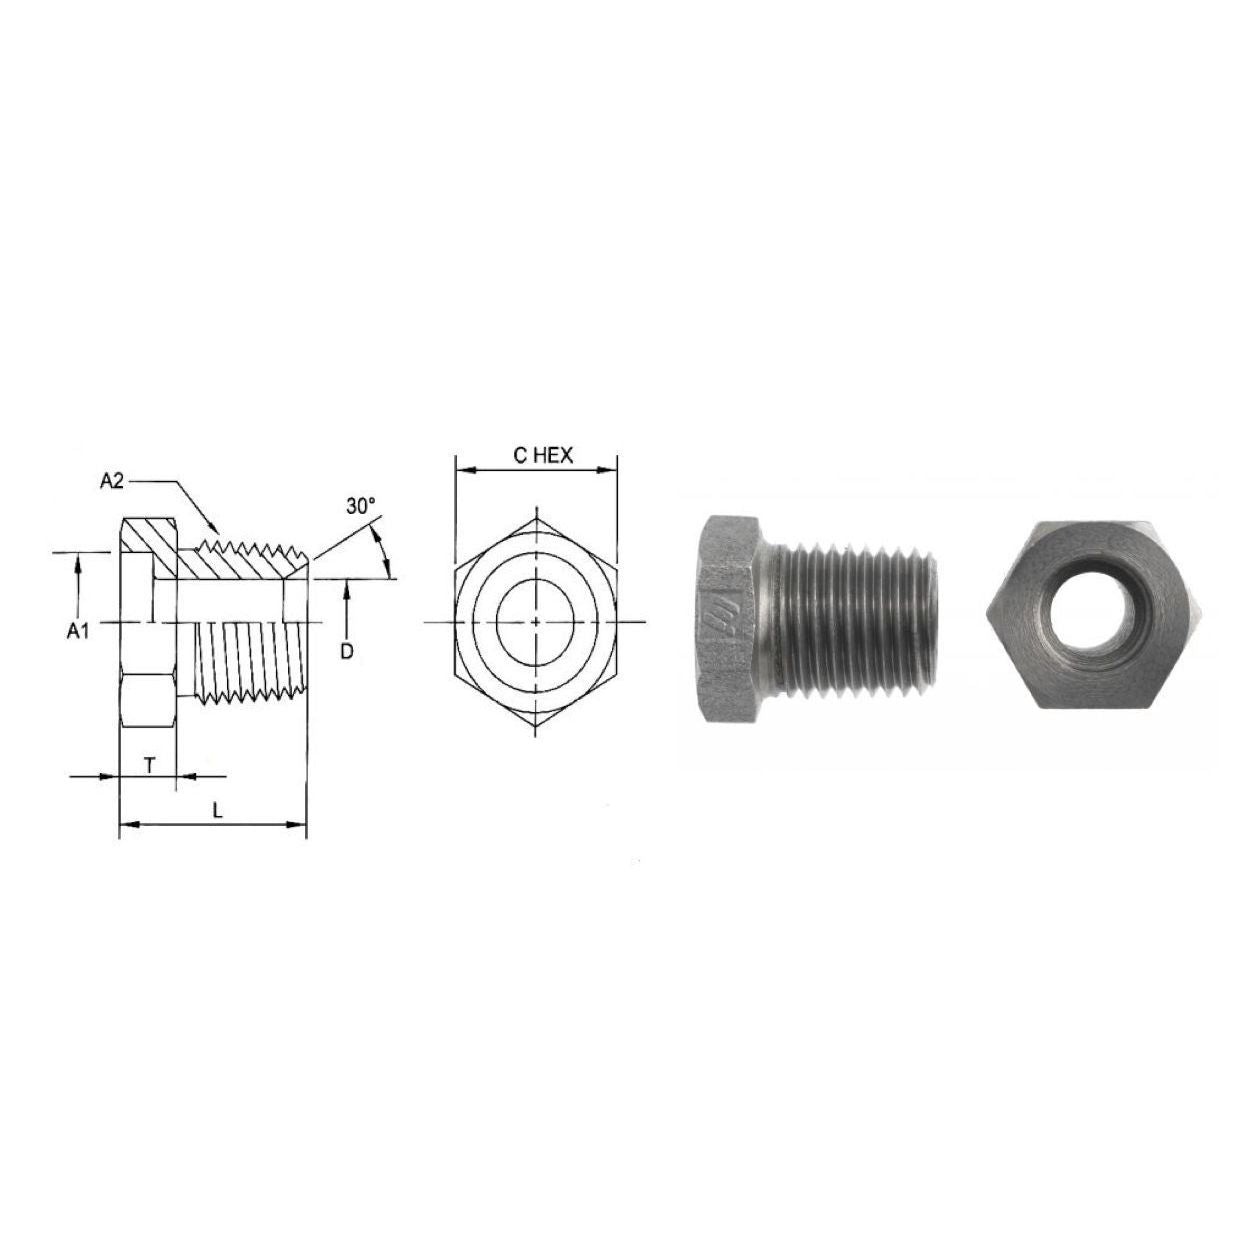 0404-12-12-SS : OneHydraulics 0.75 (3/4) Bore x 0.75 (3/4) Male NPT Straight Plug, Stainless Steel